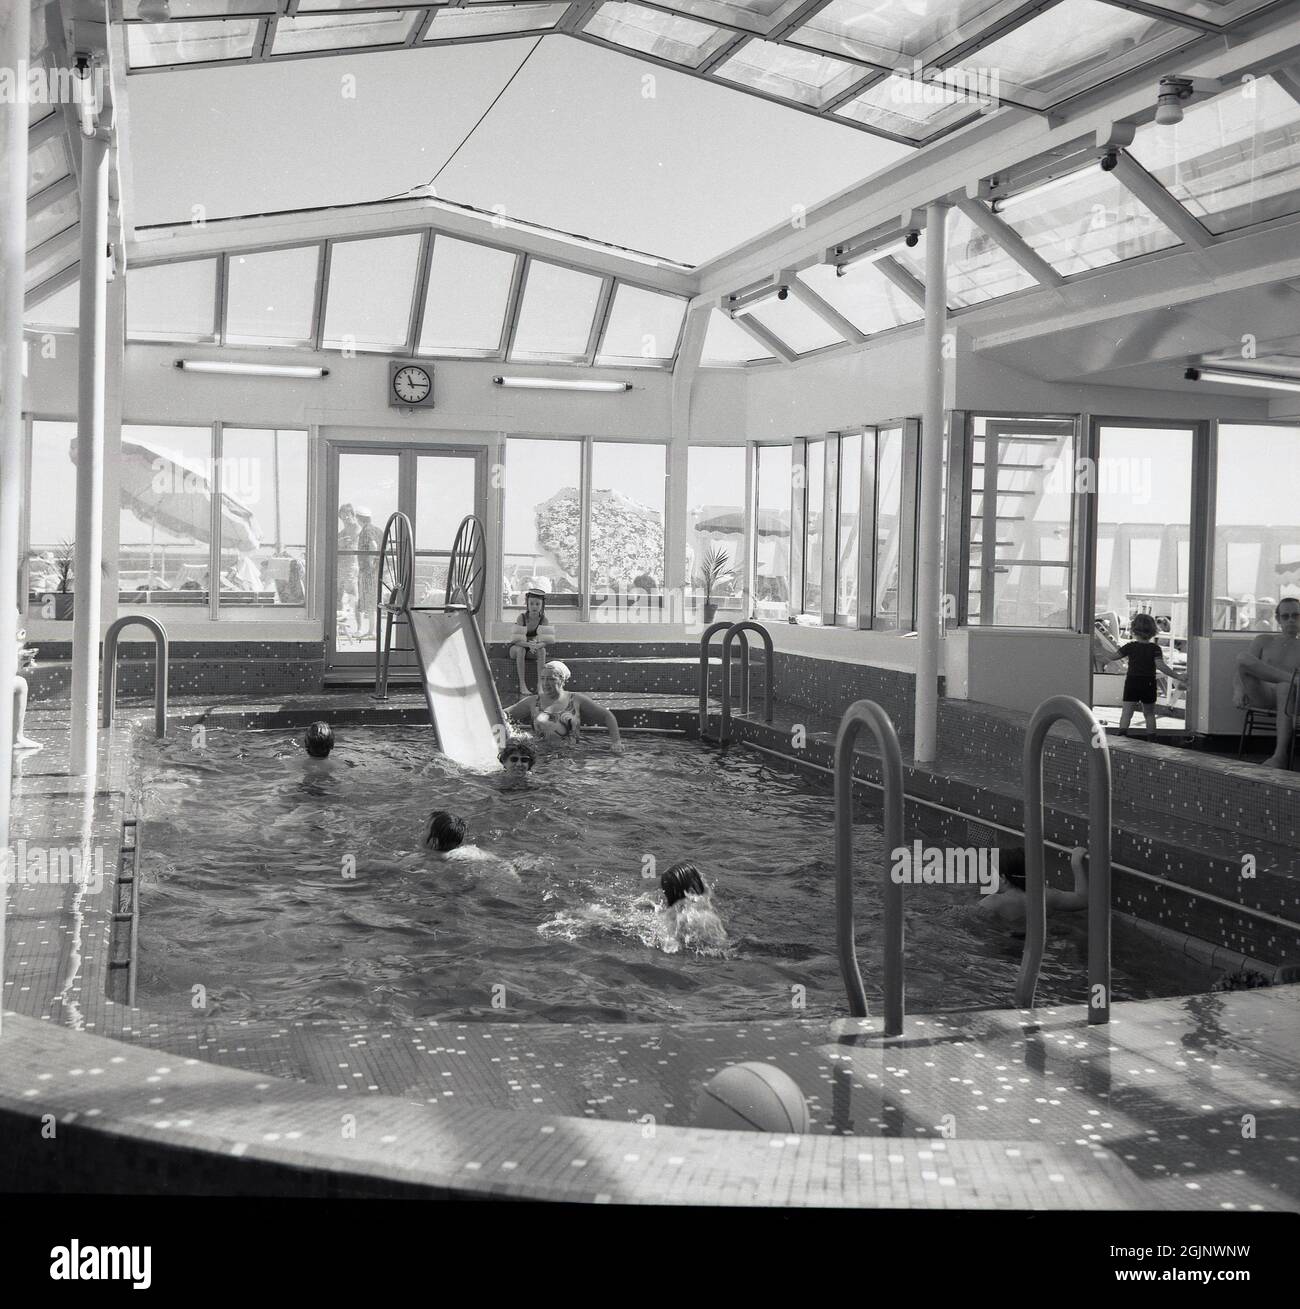 1965, historical, cruise ship passengers enjoying the covered swimming pool on the Sagafjord ocean liner. Built for the Norweigian America Line and one of the most luxuriors liners of her day, the construction of the cruise ship was so expensive that it put the shipyard that built it, the long-established French FCM company, out of business. Her maiden voyage was from Oslo to New York in October 1965 and she set a new benchmark for luxury at sea. The ship was voted amongst the 10 best cruise ships in the world until the early 1990s. Stock Photo